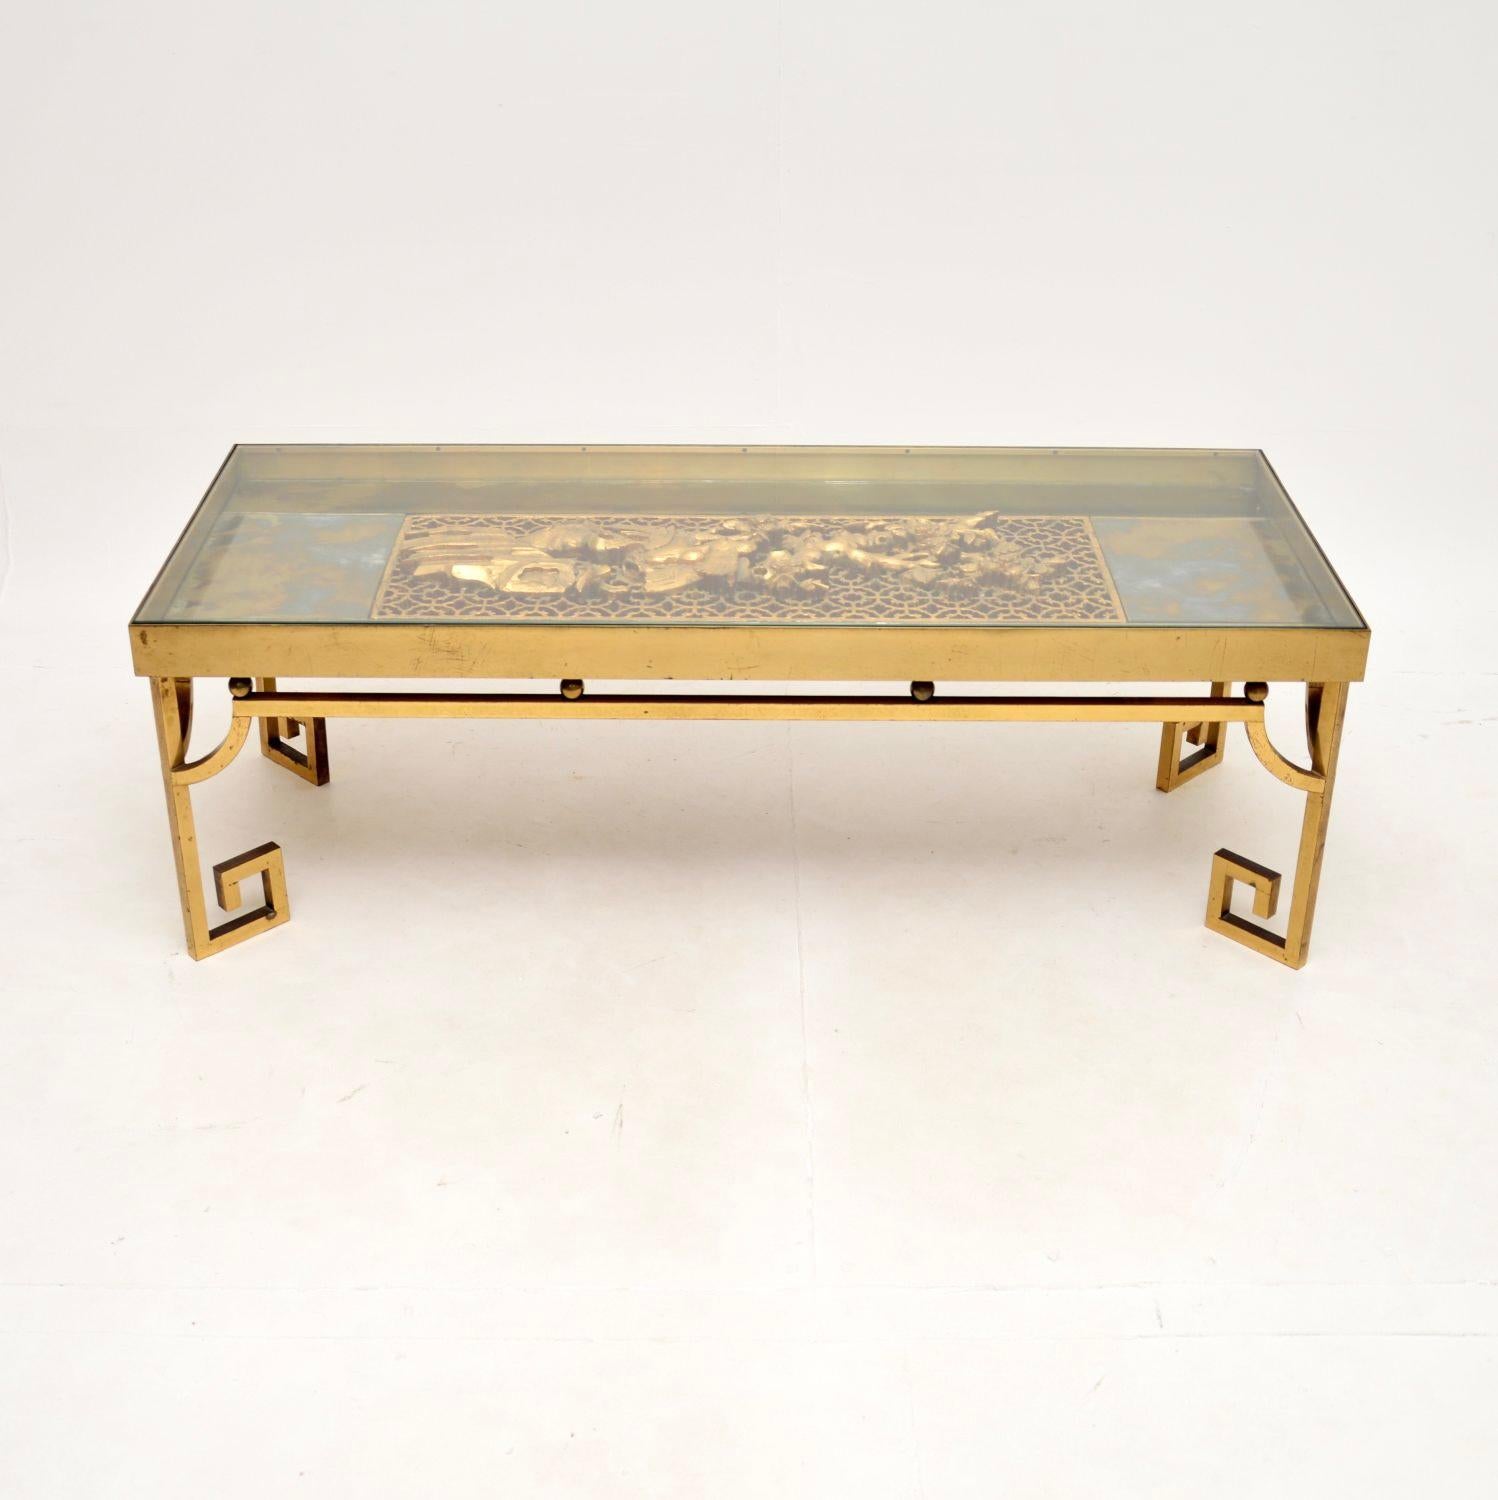 An absolutely stunning vintage solid brass oriental style coffee table. This was made in England, it dates from around the 1960’s.

The quality is outstanding, this is a beautifully made and very unique piece, one that you are not likely to find